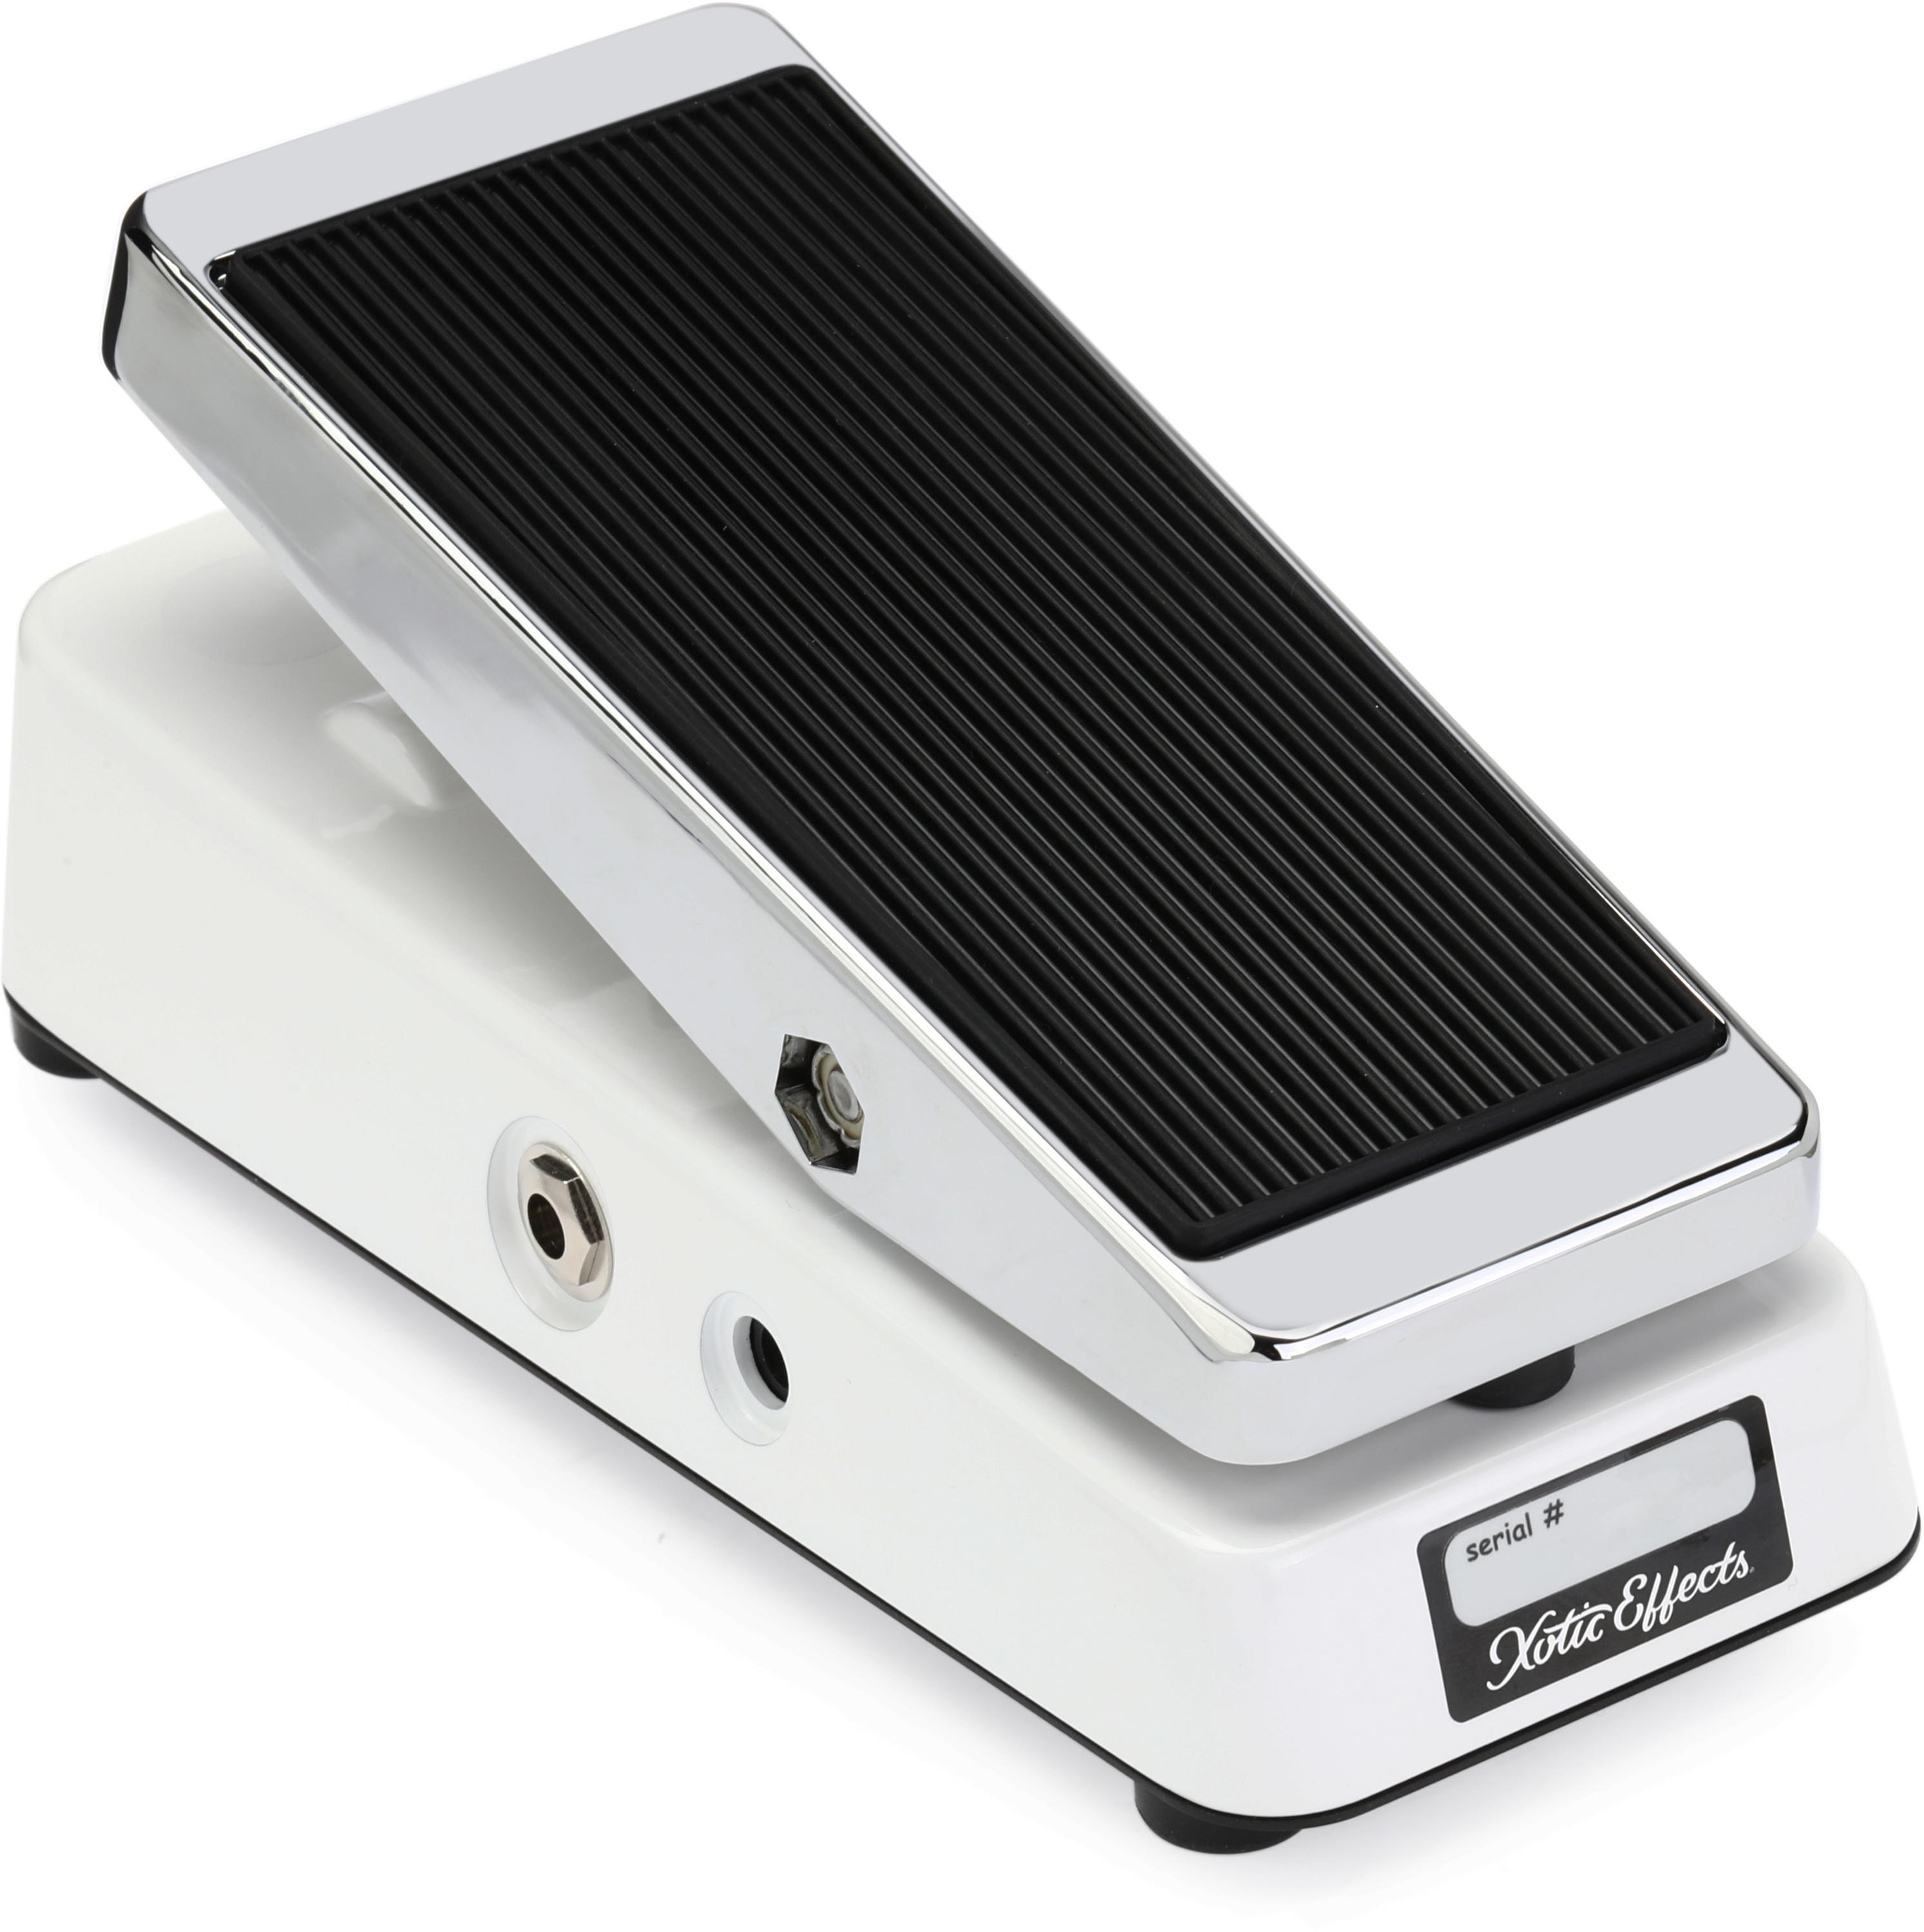 Fulltone Clyde Deluxe Wah Pedal | Sweetwater